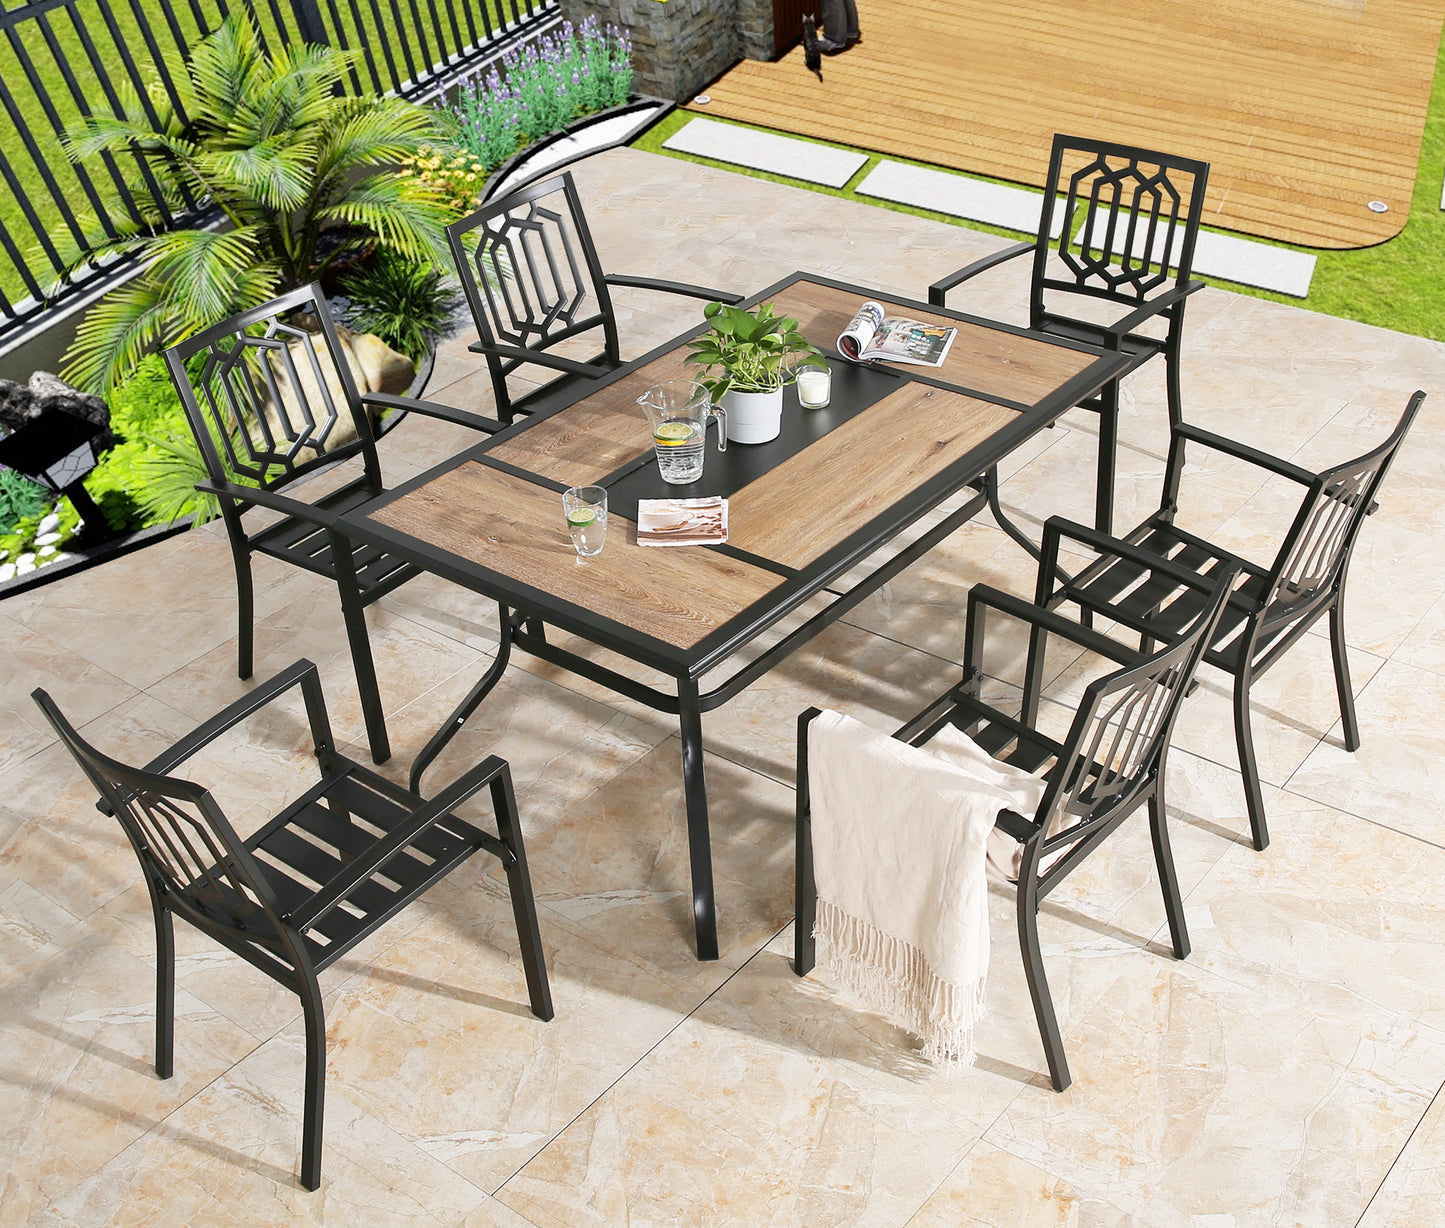 Outdoor 7-Piece Dining Set 6 Patio Dining Arm Chairs and Rectangular Garden Table with Umbrella Hole